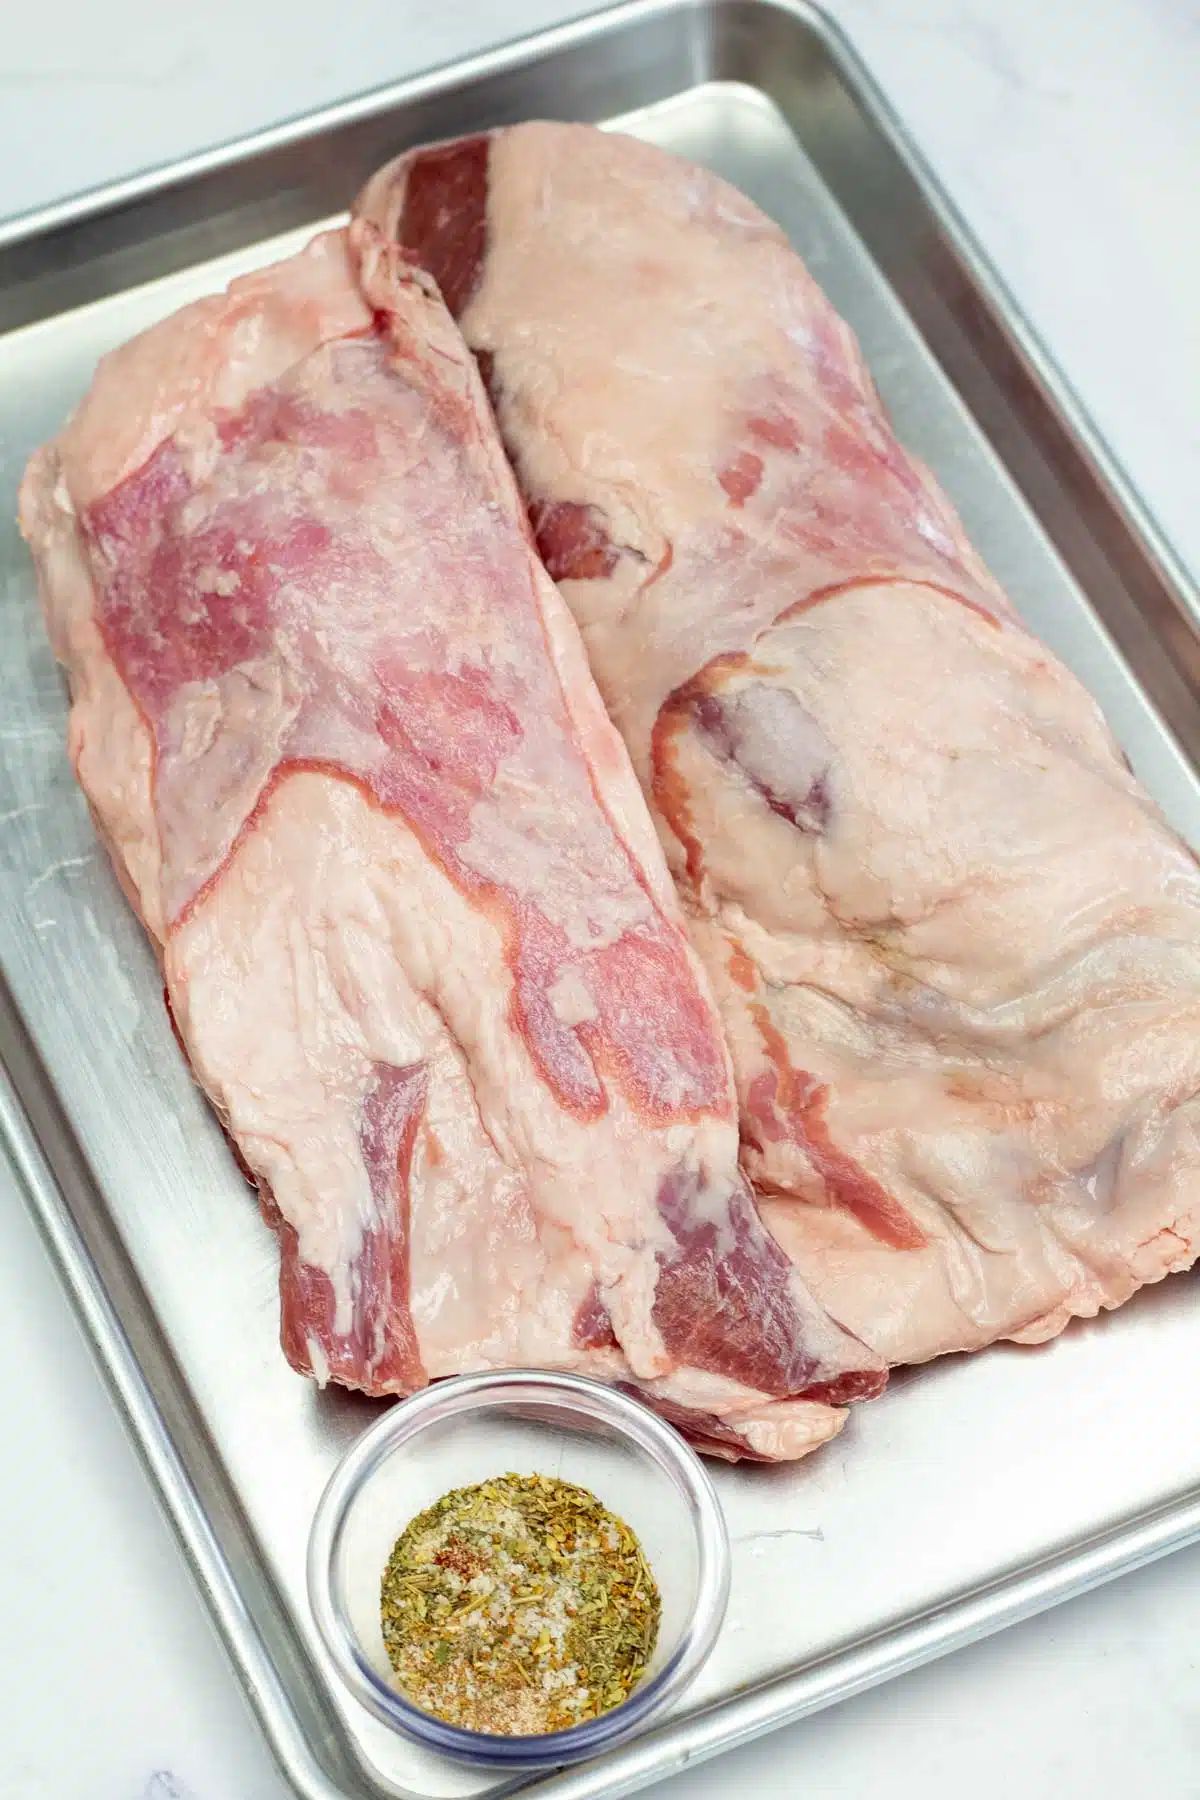 Tall image showing roasted lamb breast ingredients.